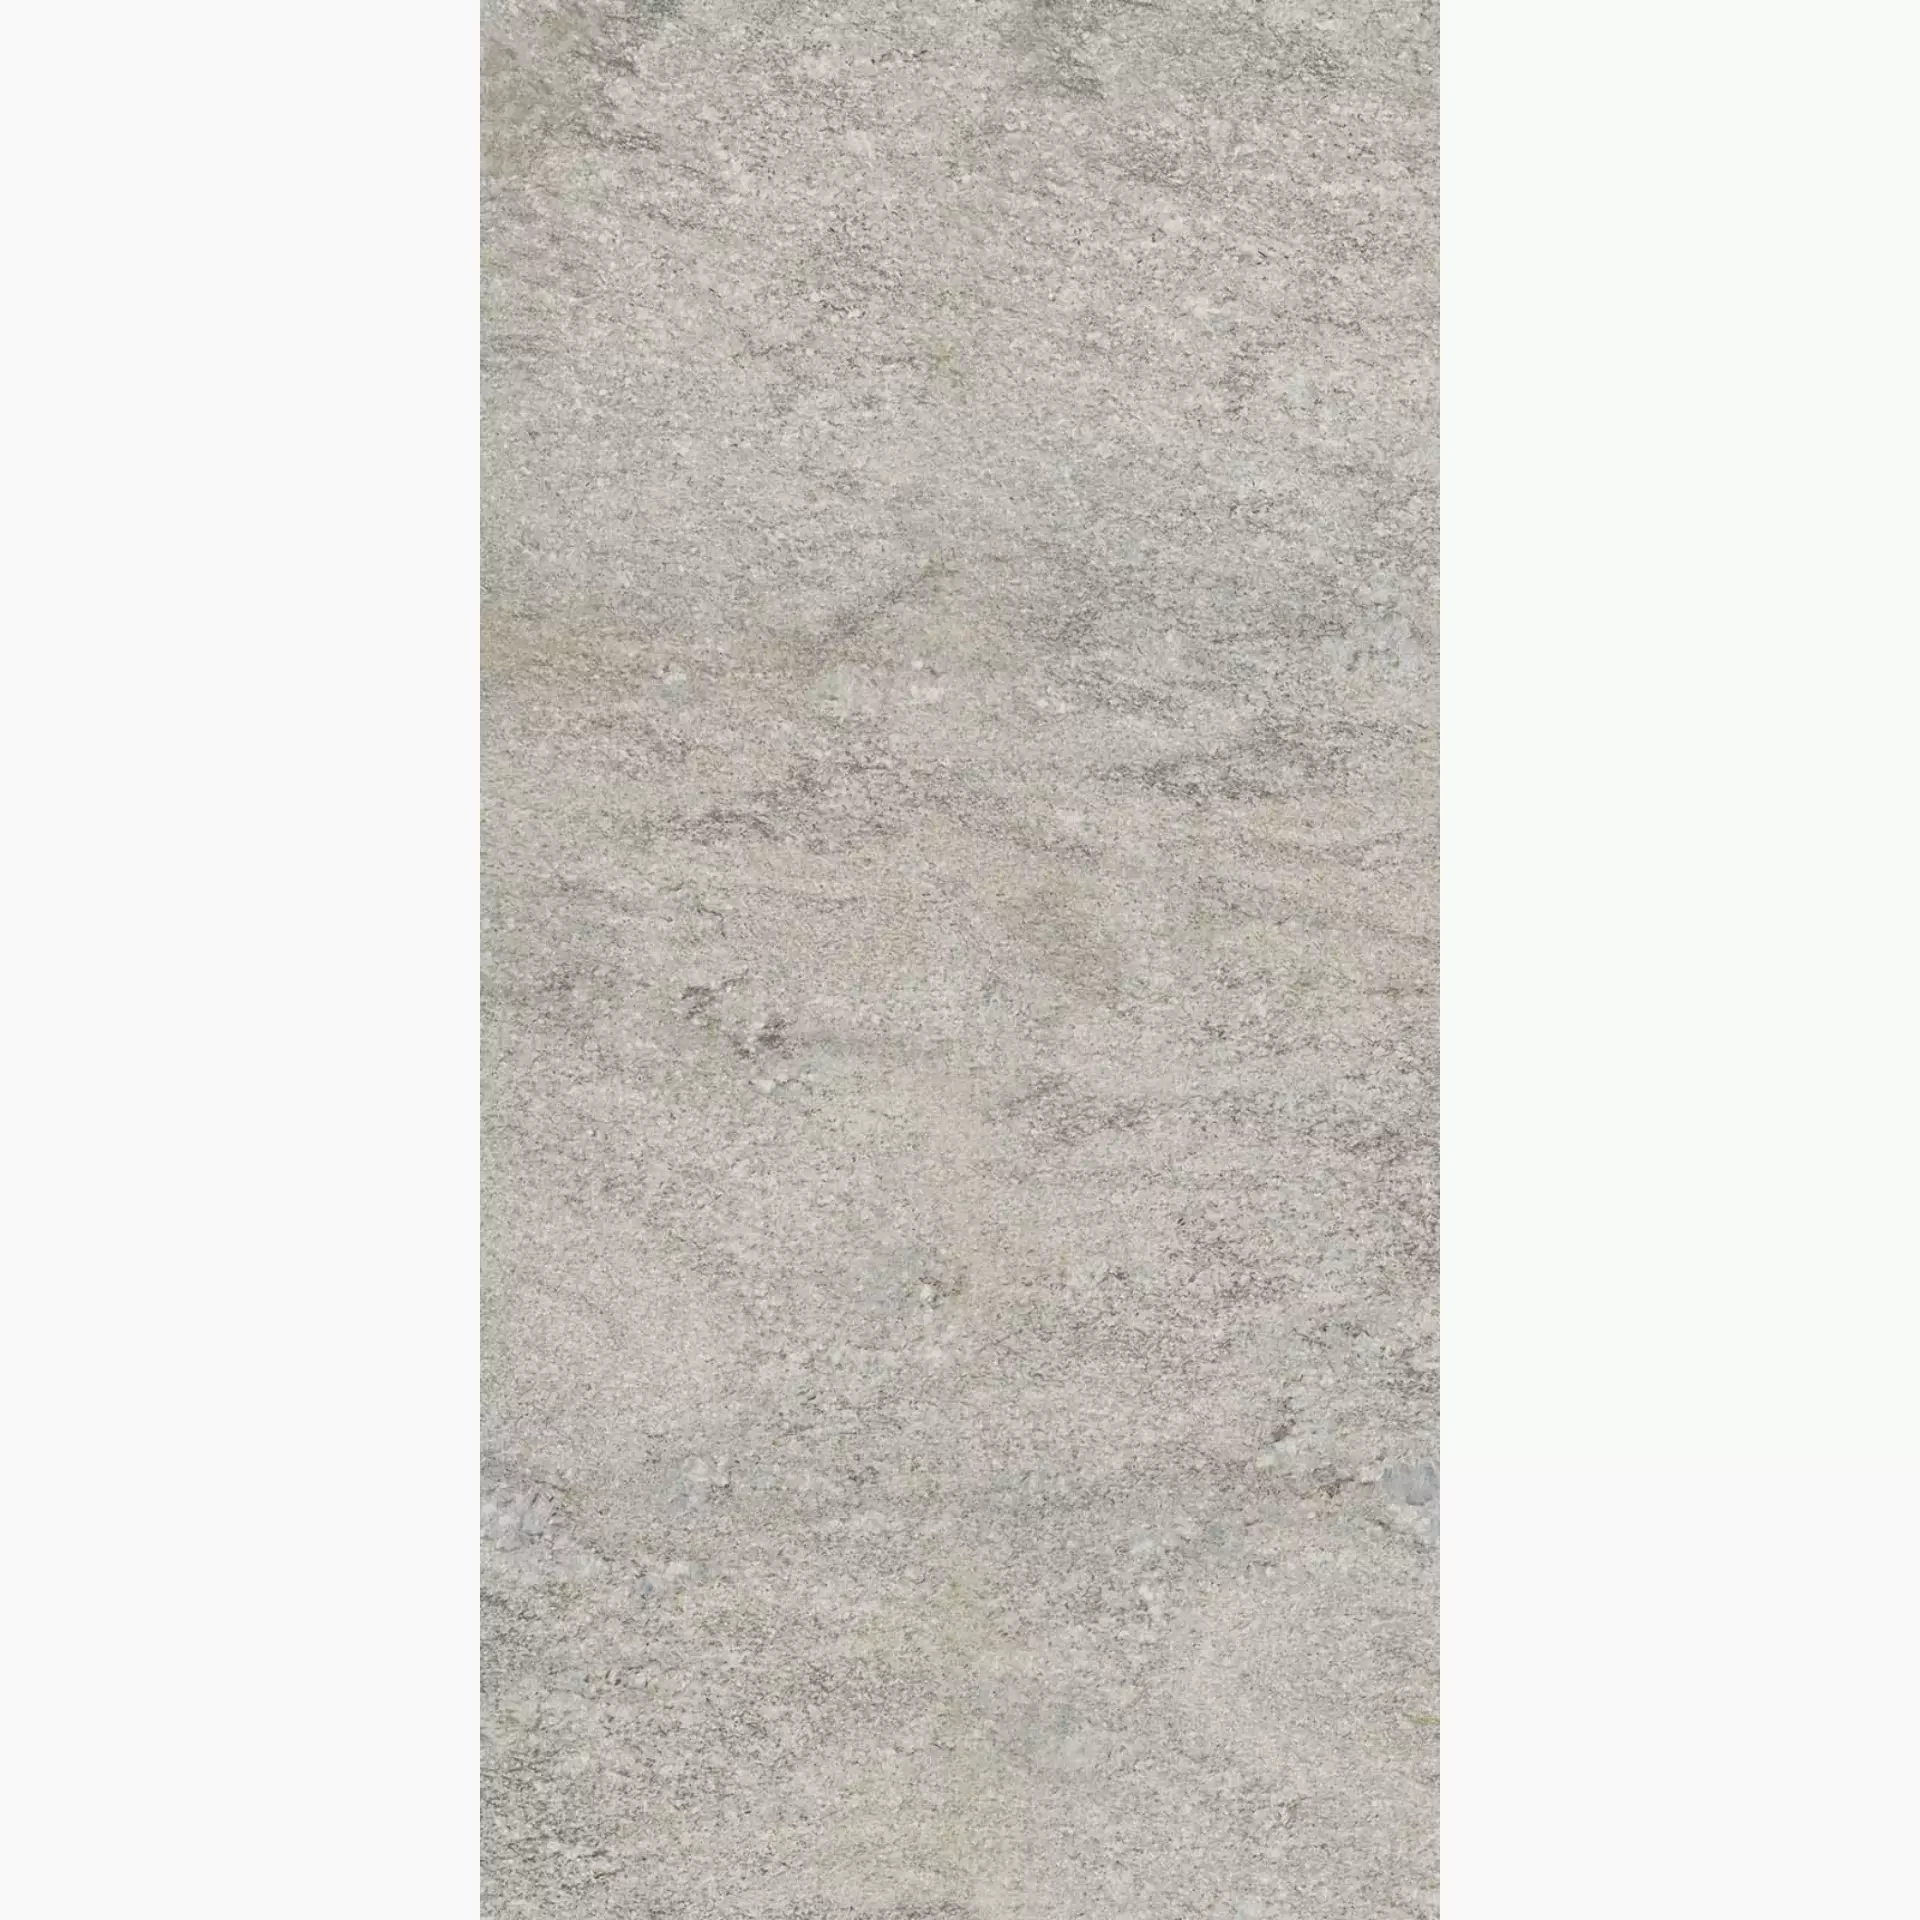 Keope Percorsi Frame Plima Silver Spazzolato 474A5731 60x120cm rectified 20mm